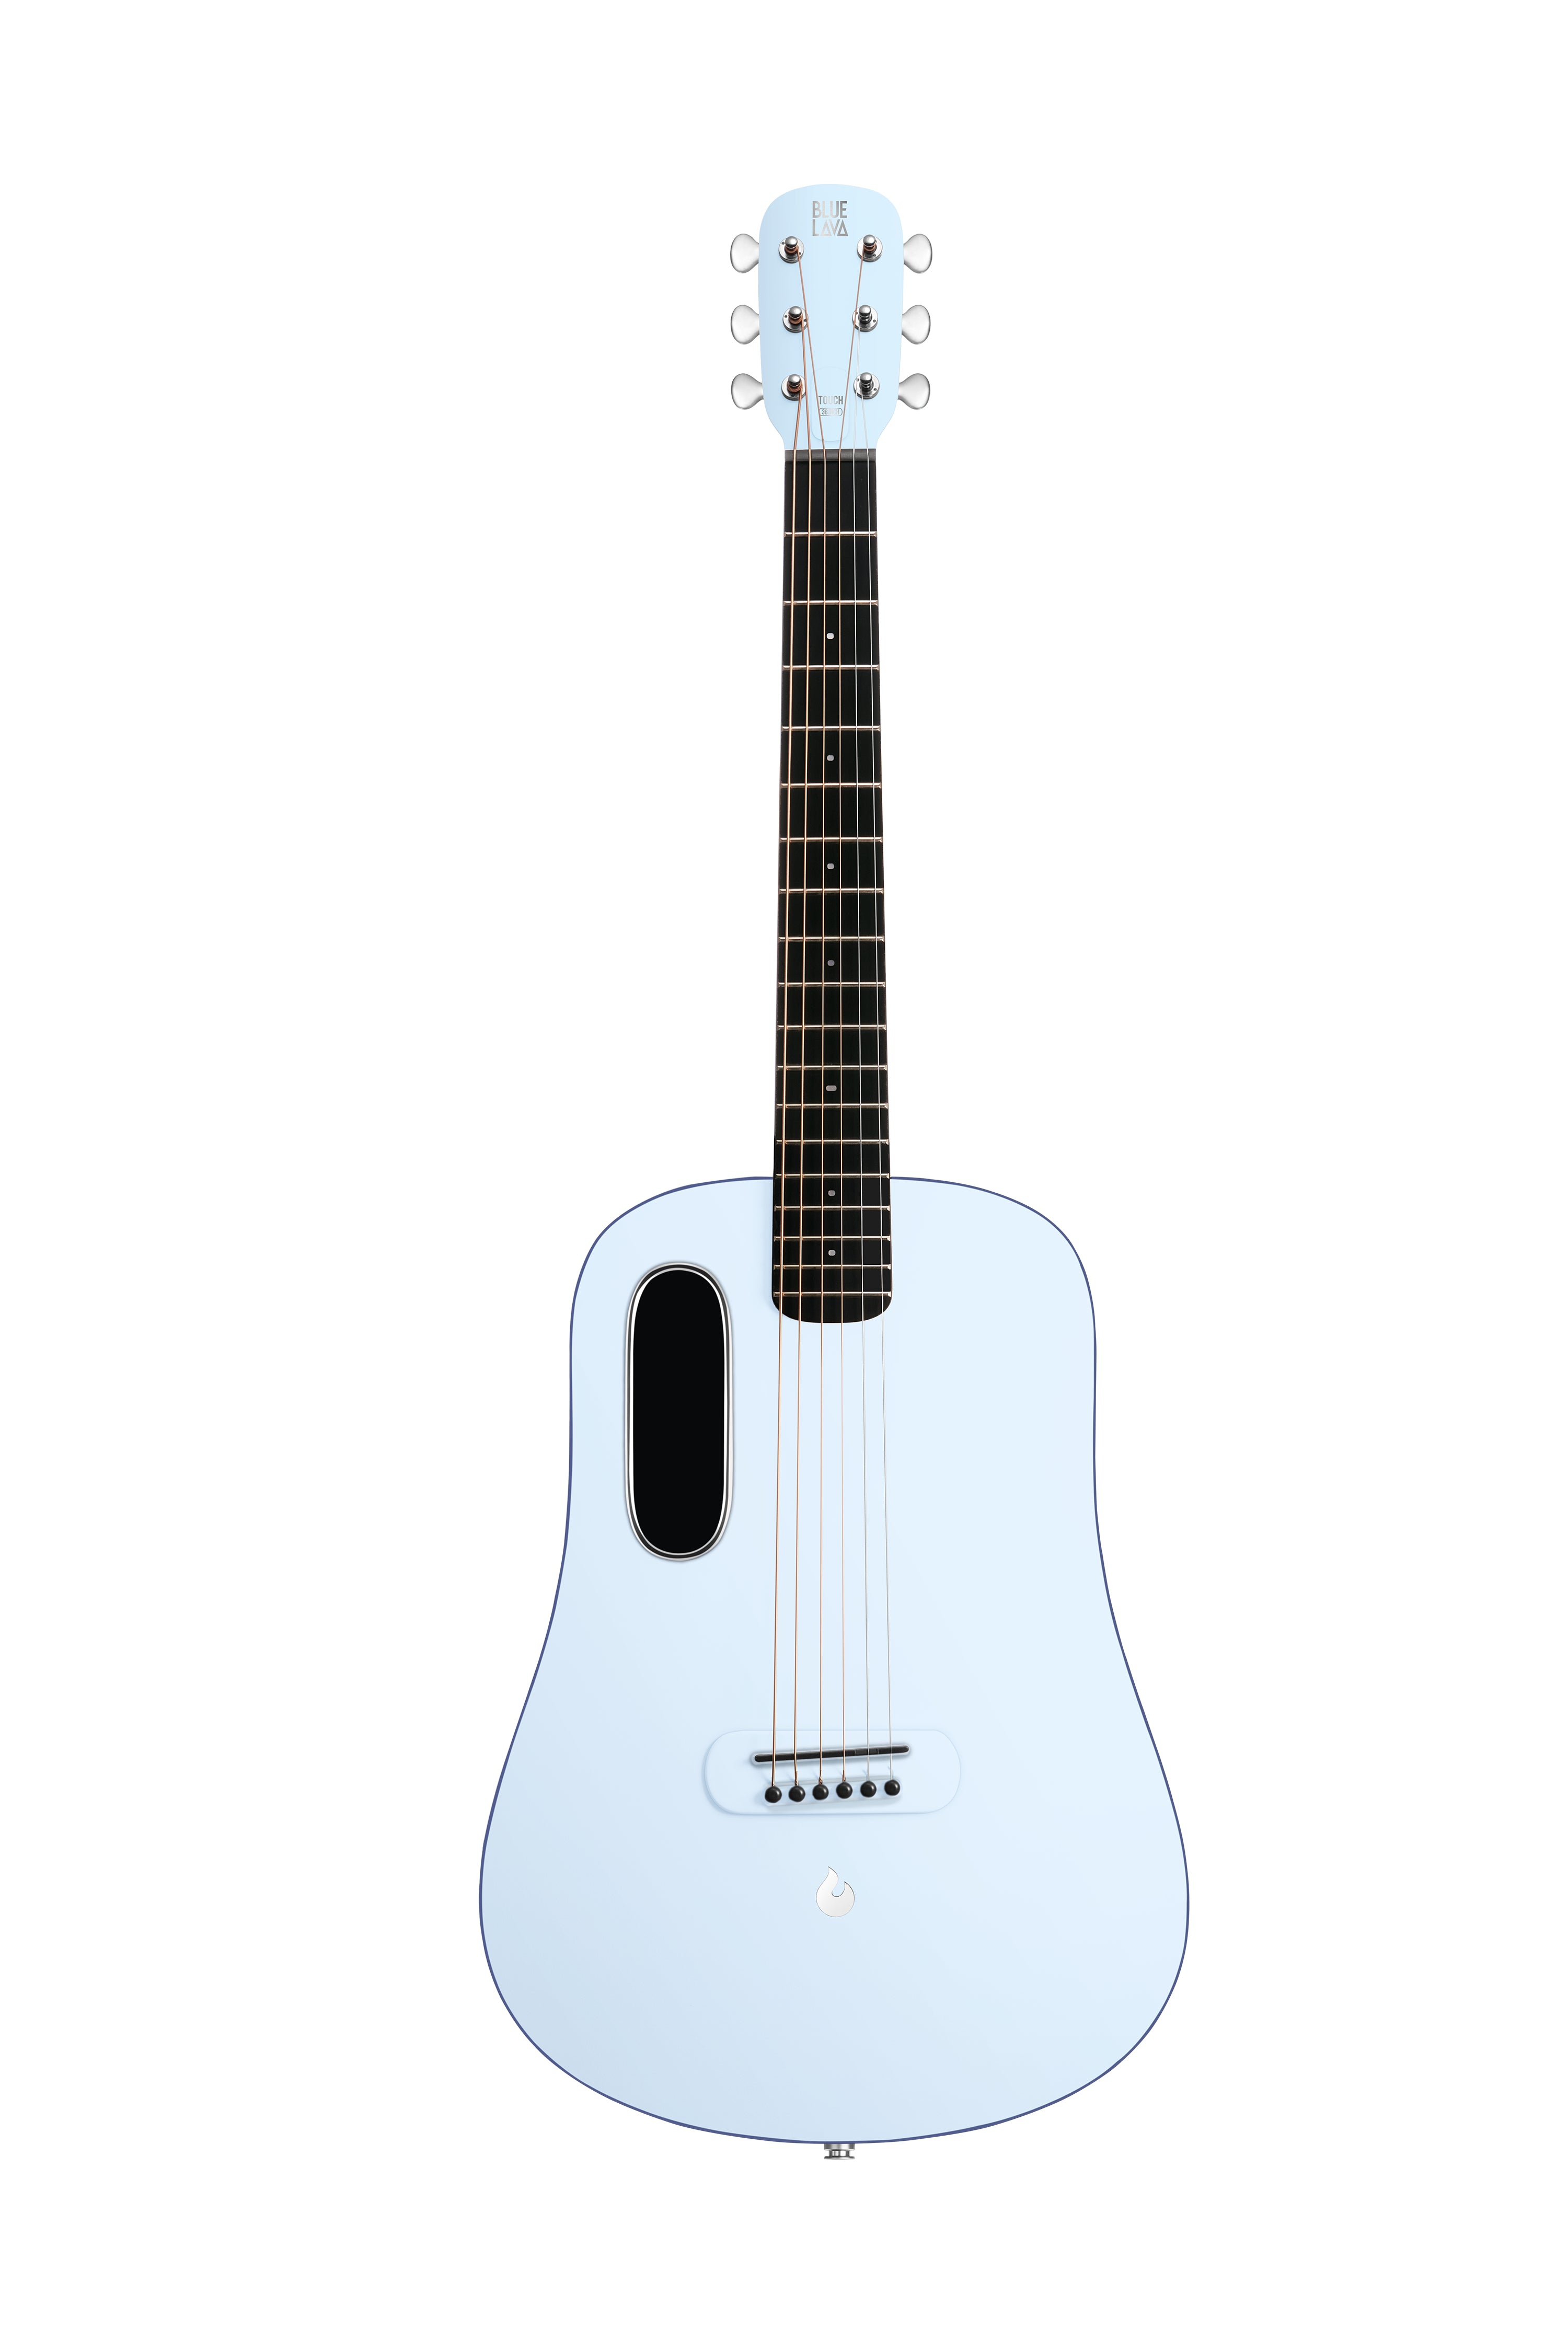 BLUE LAVA TOUCH with Airflow Bag ~ Ice Blue / Ocean Blue-Richards Guitars Of Stratford Upon Avon